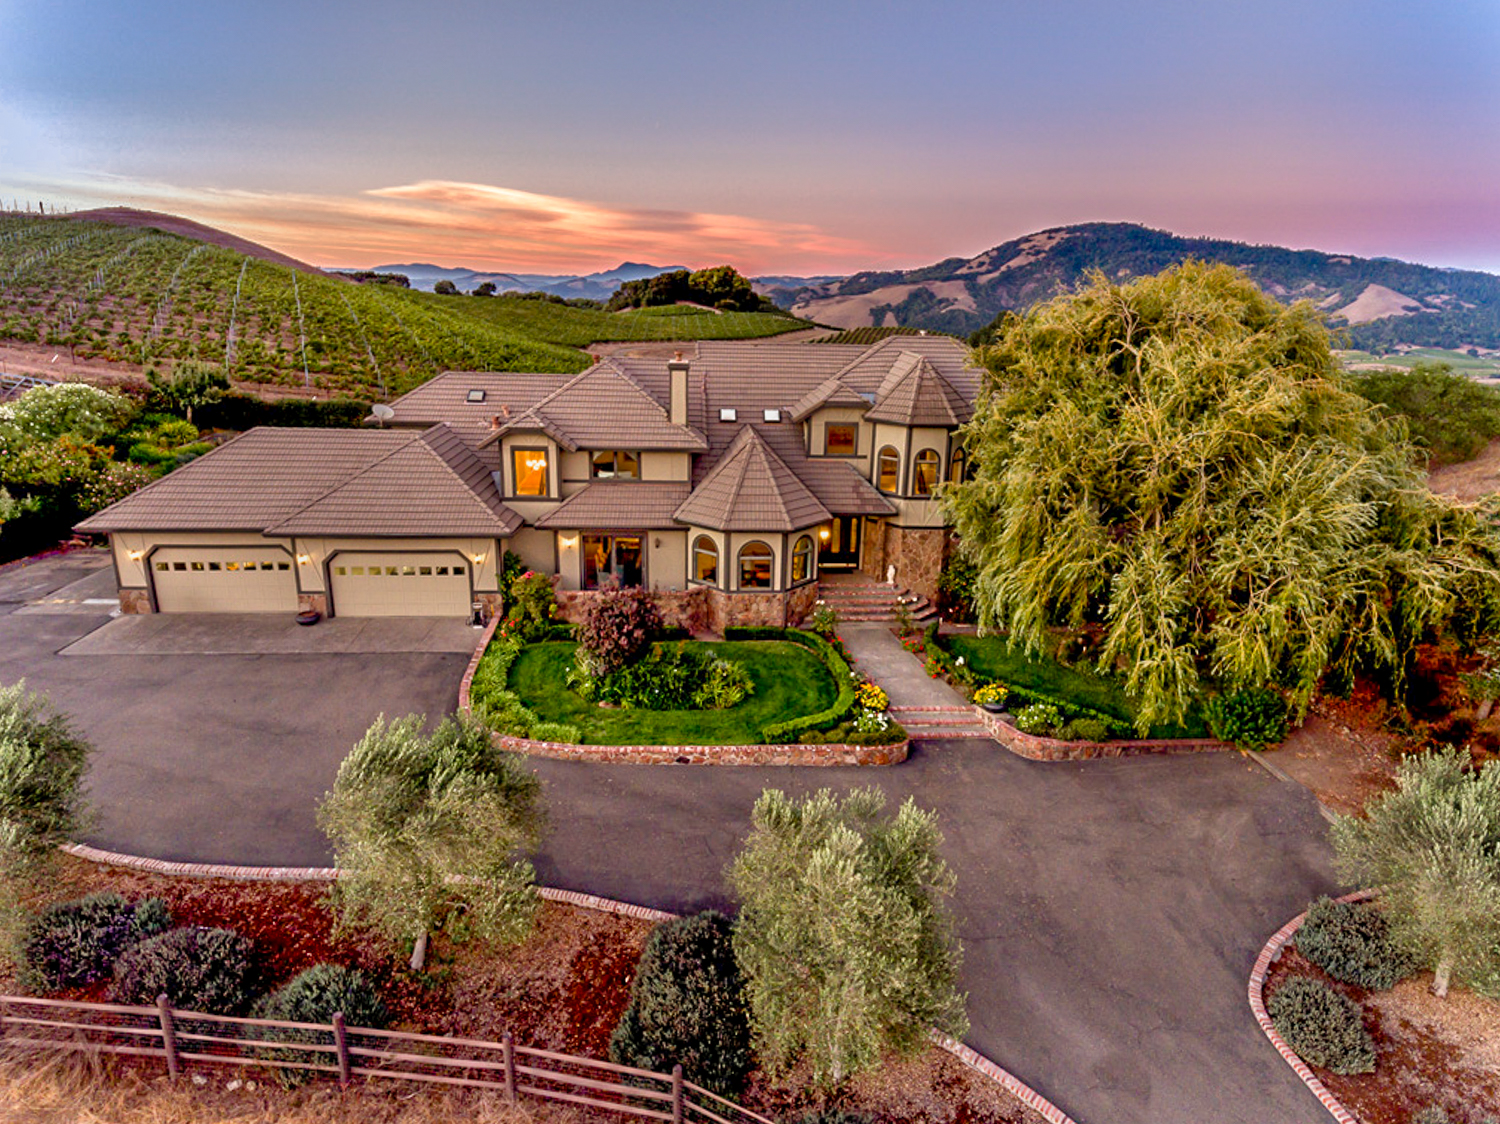 Quintessential Wine Country Estate with Breathtaking Views